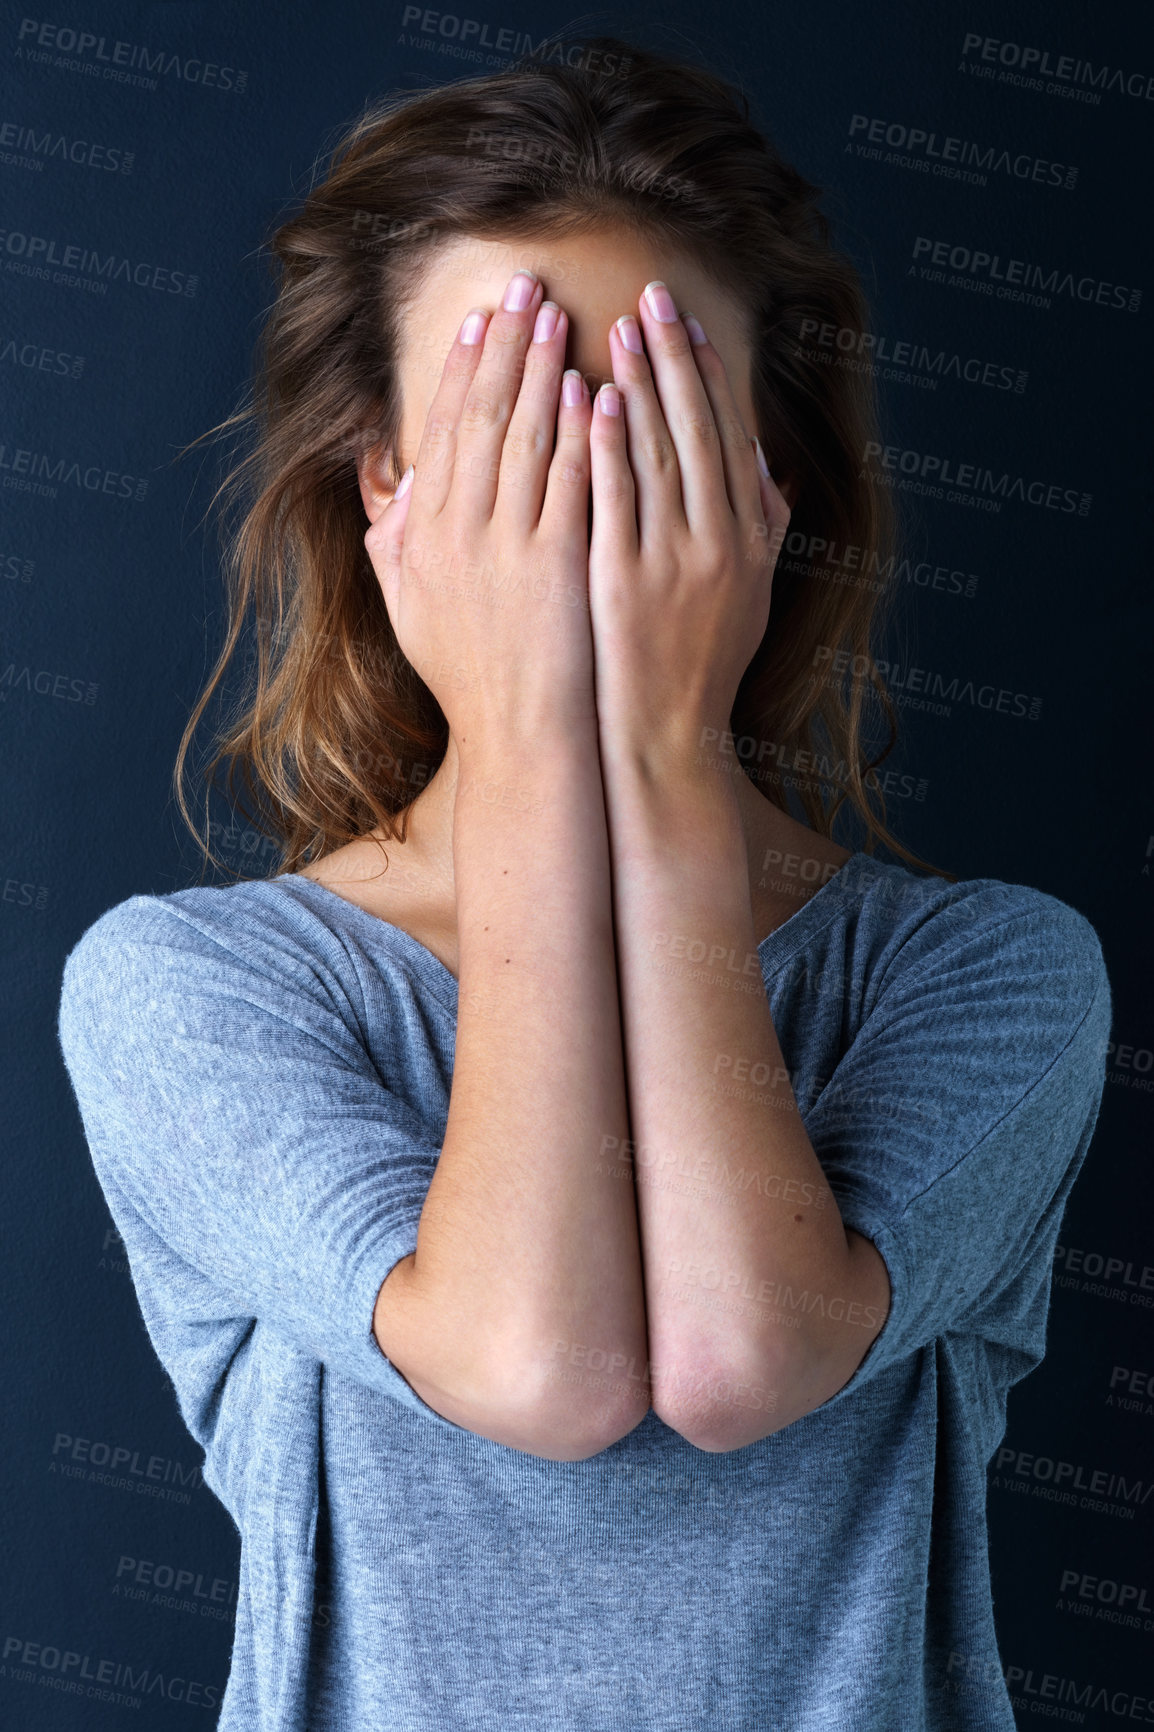 Buy stock photo Studio shot of a teenage girl with her hands covering her eyes against a dark background